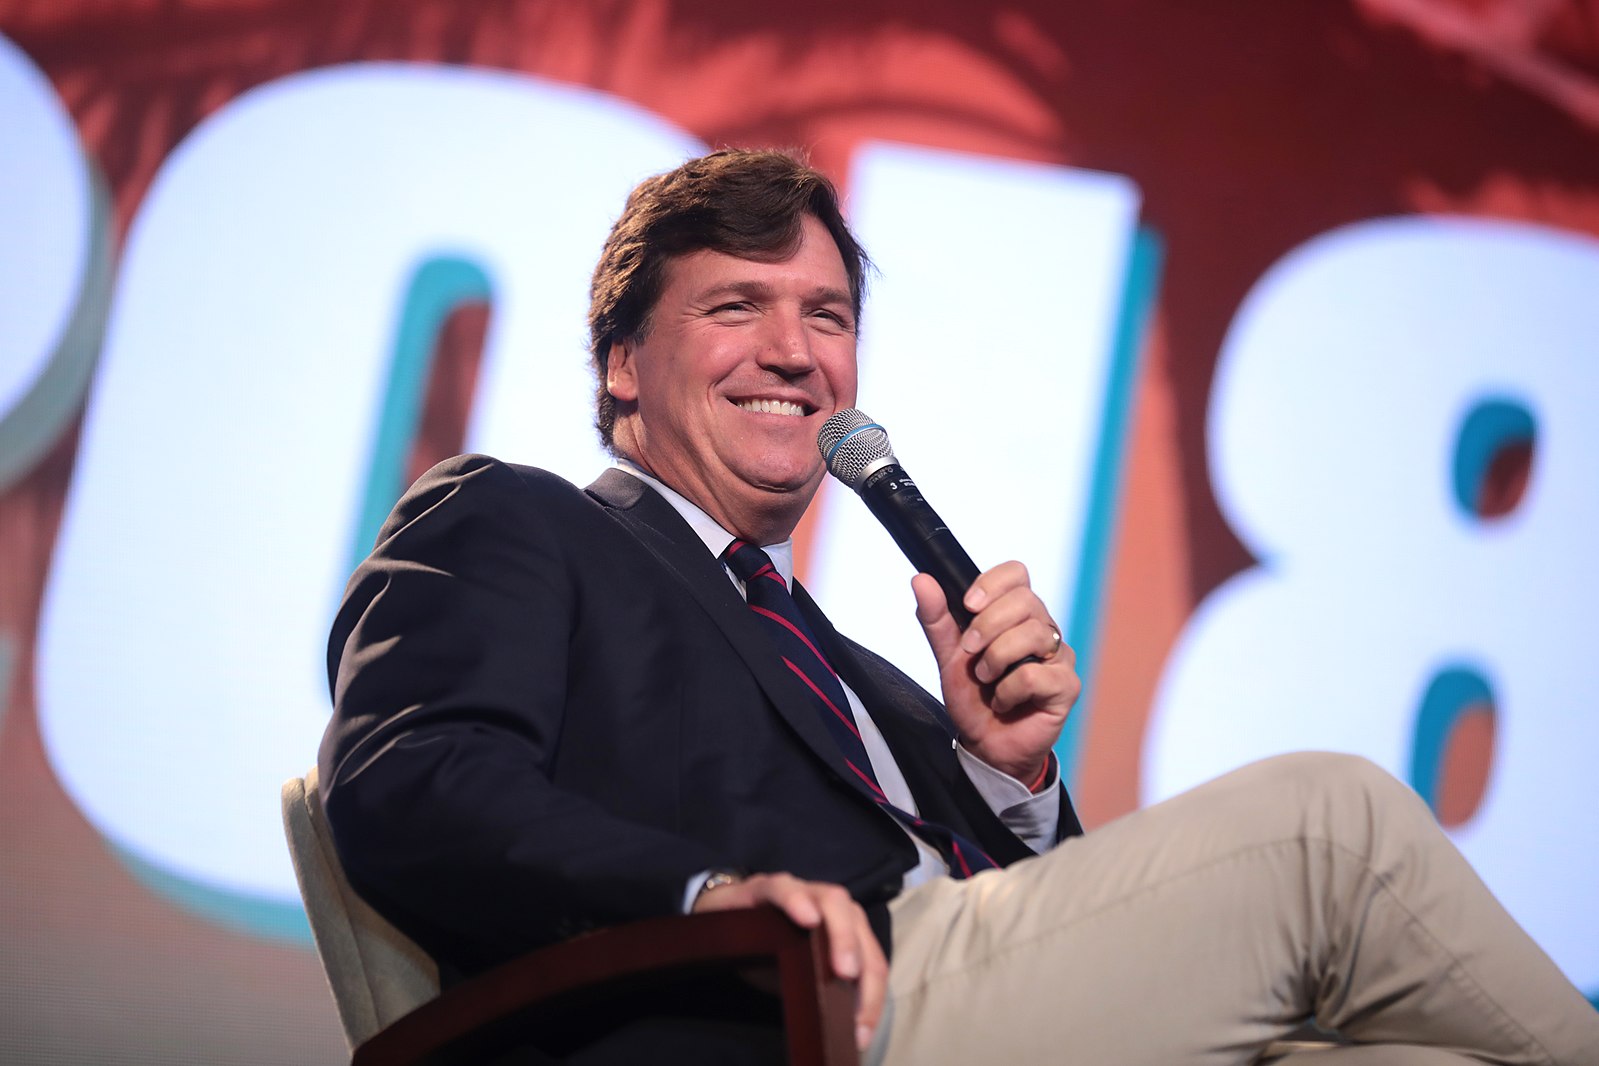 Tucker Carlson Didn’t Just Say What No One Else Would, He Invested In People When No One Else Did